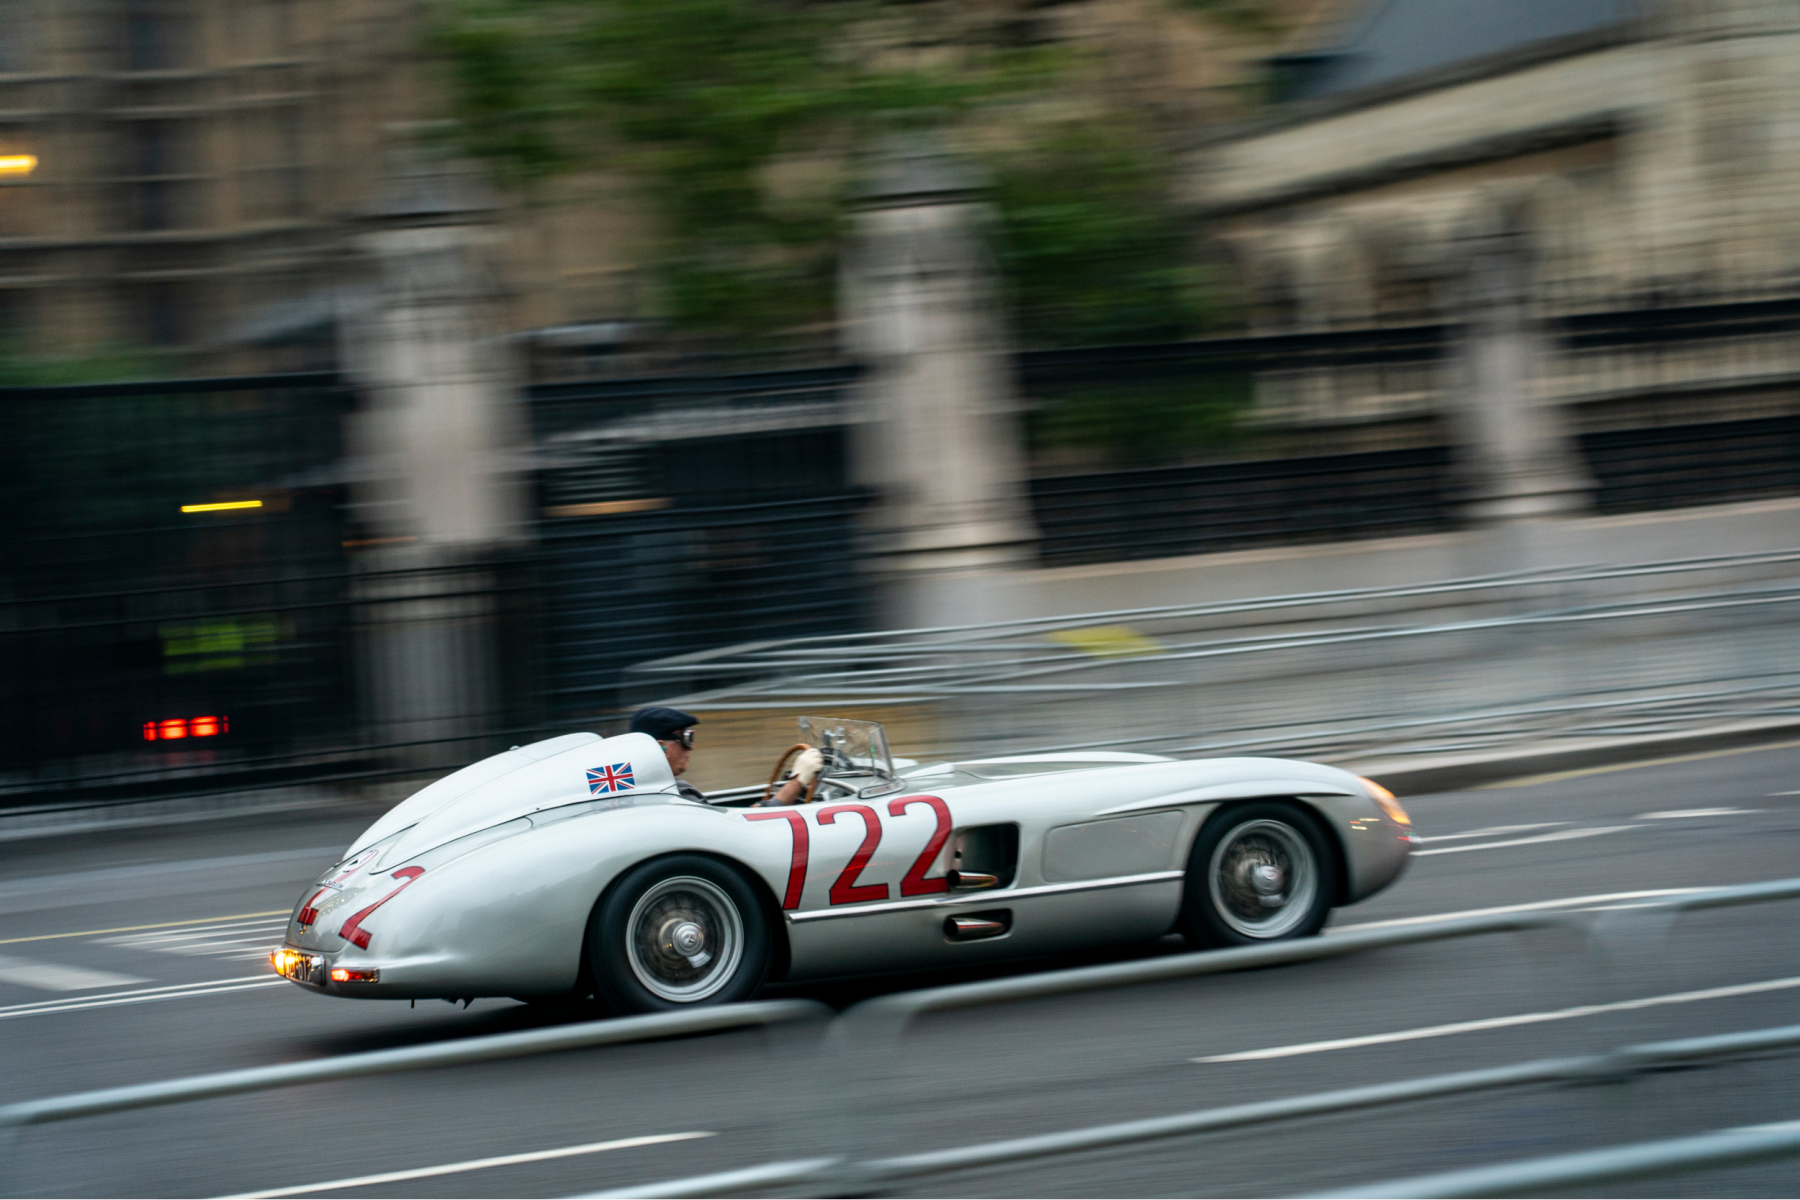 Mercedes-Benz 300 SLR “722” (W 196 S). Filming with the racing sports car for the short film “The Last Blast”, end of September 2021. With the unique drive through London, Mercedes-Benz Classic honored the life of Sir Stirling Moss, who died on 12 April 2020 at the age of 90. The racing driver and his co-driver Denis Jenkinson won the 1955 Mille Miglia with this car. Driving scene.